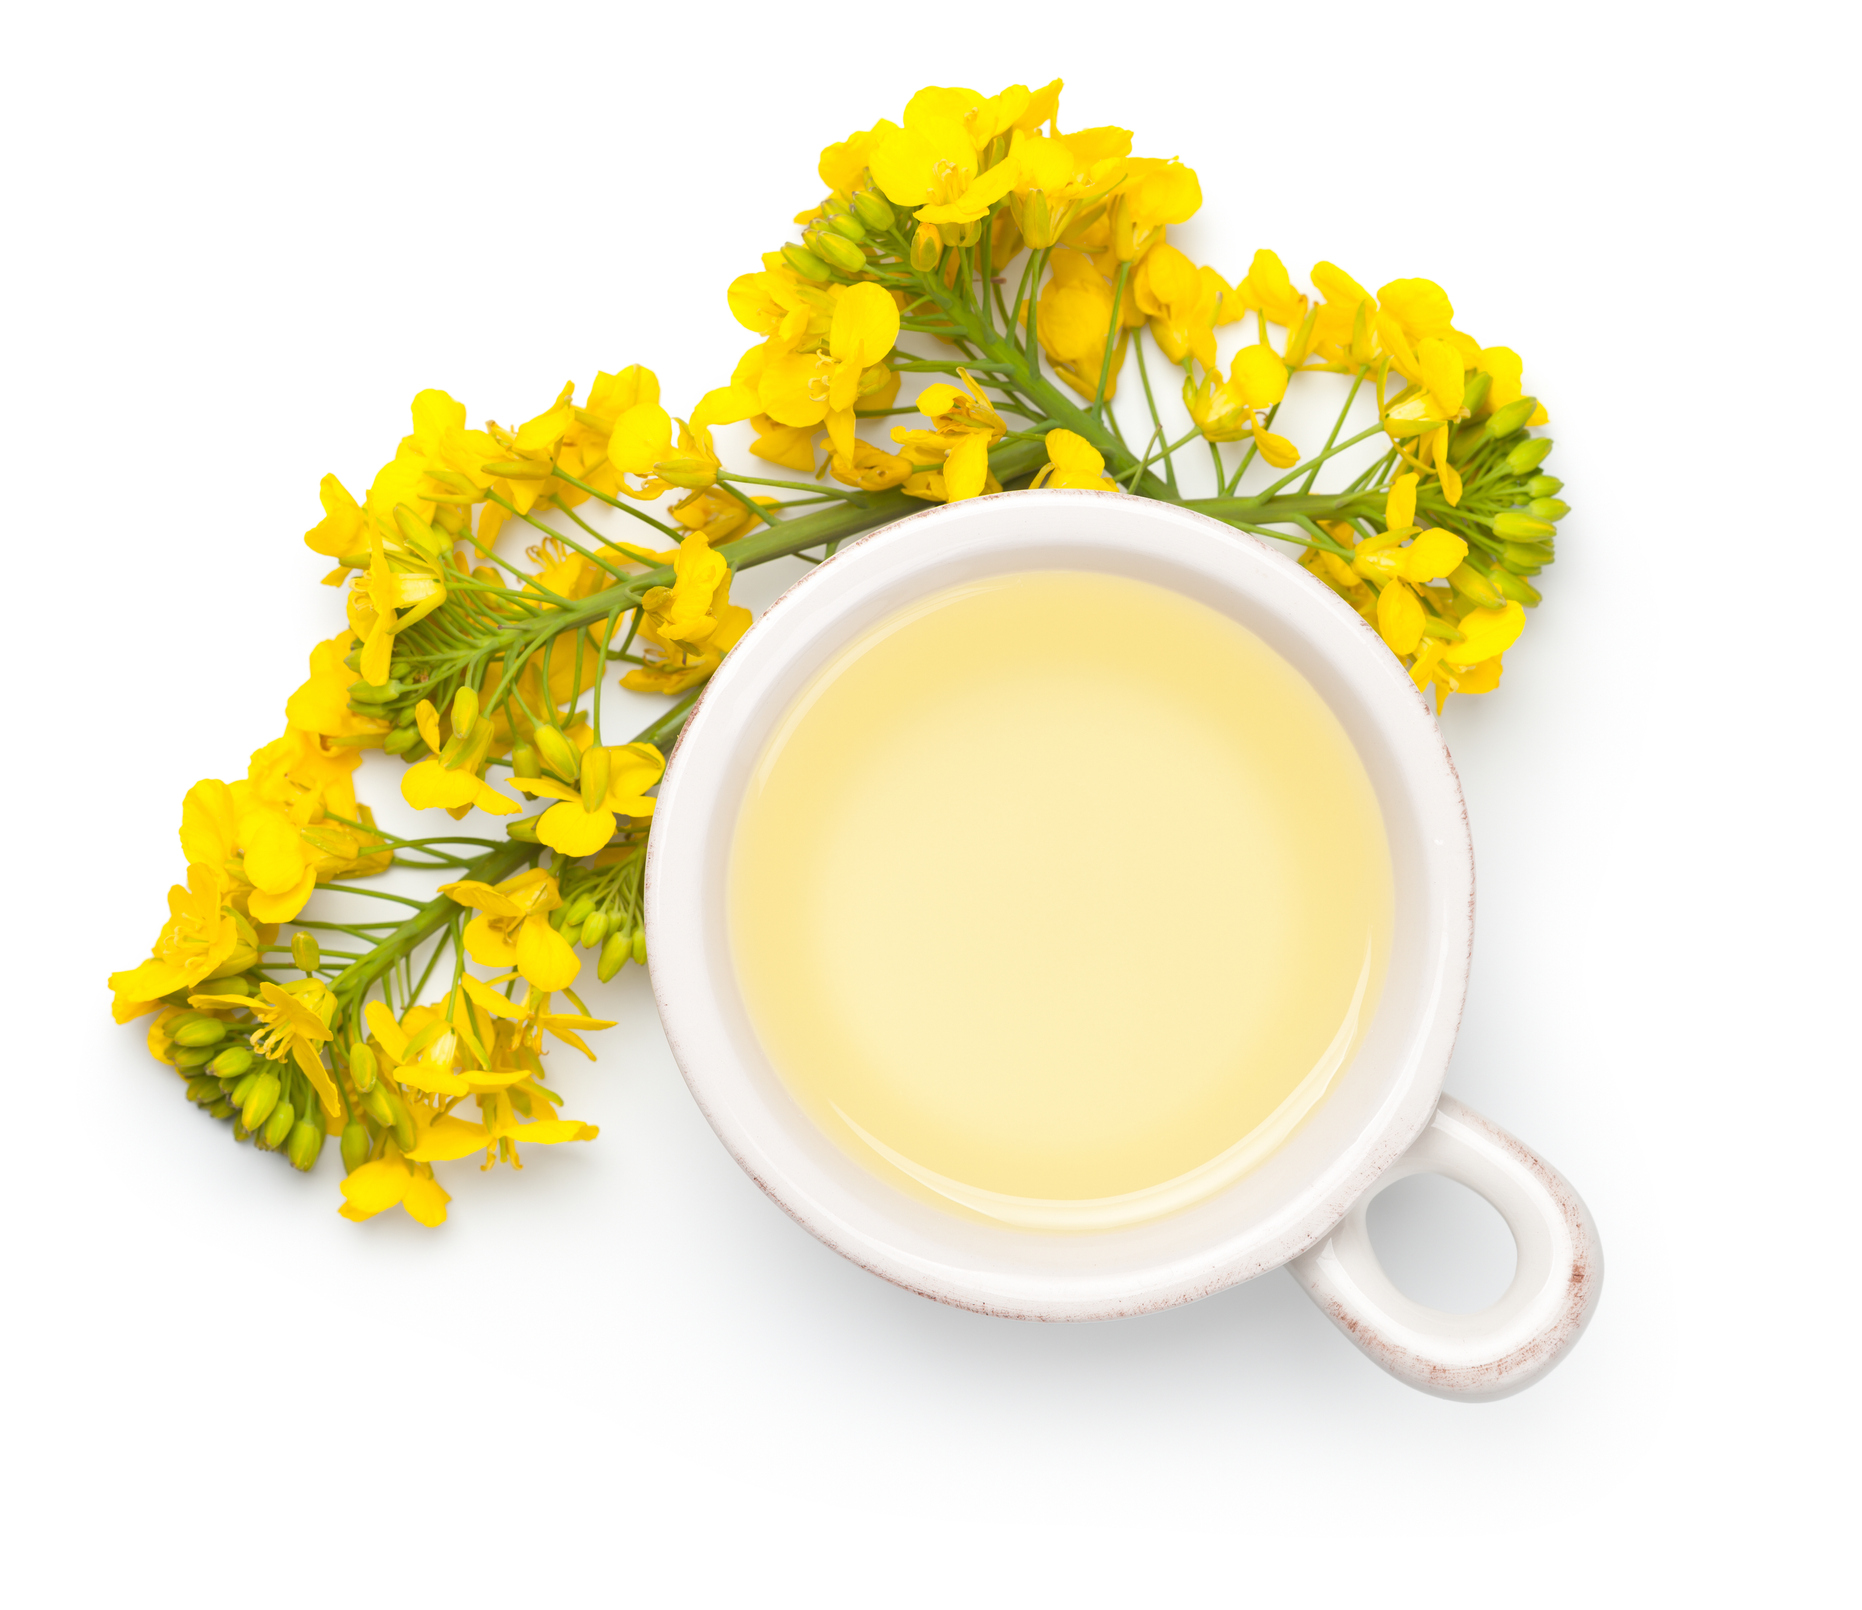 Rapeseed oil with rape flowers isolated on white background. Top view